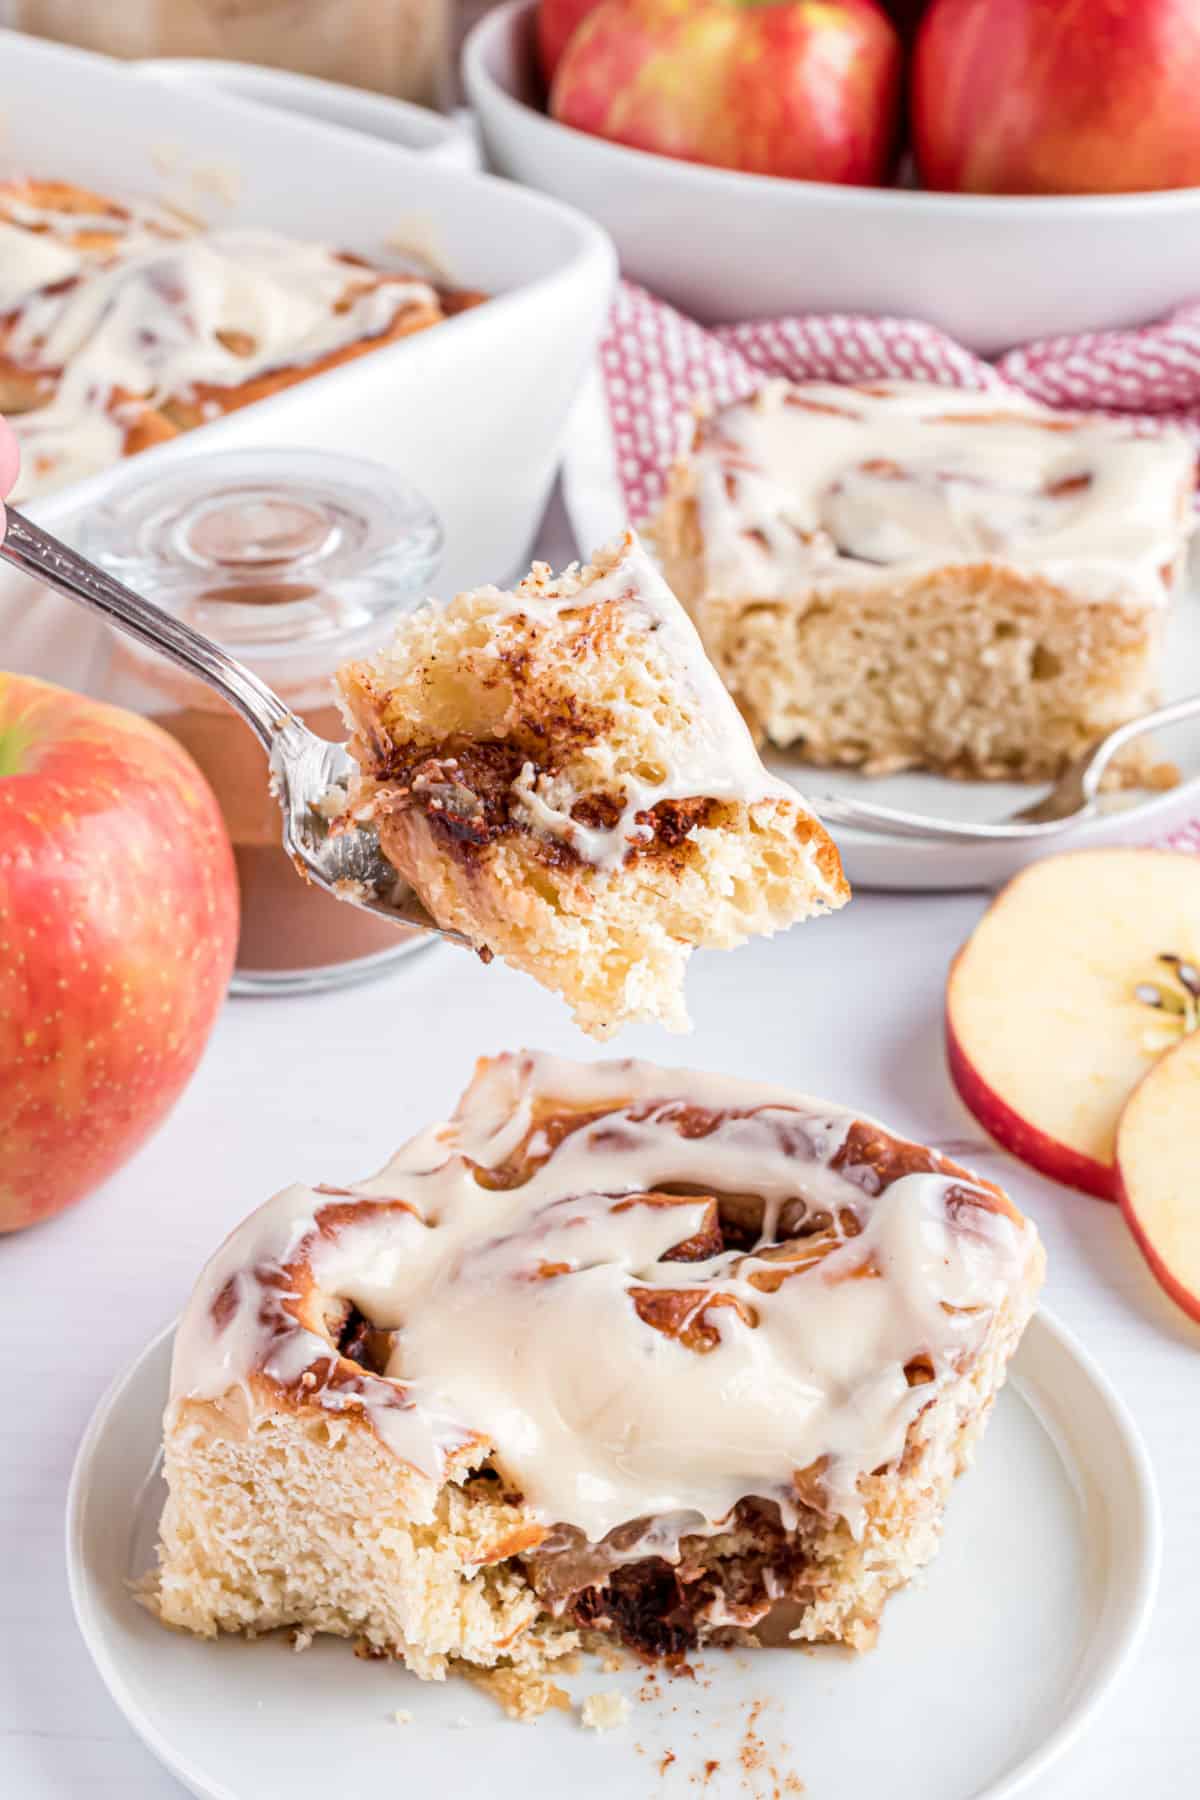 Apple cinnamon roll with one forkful being removed.